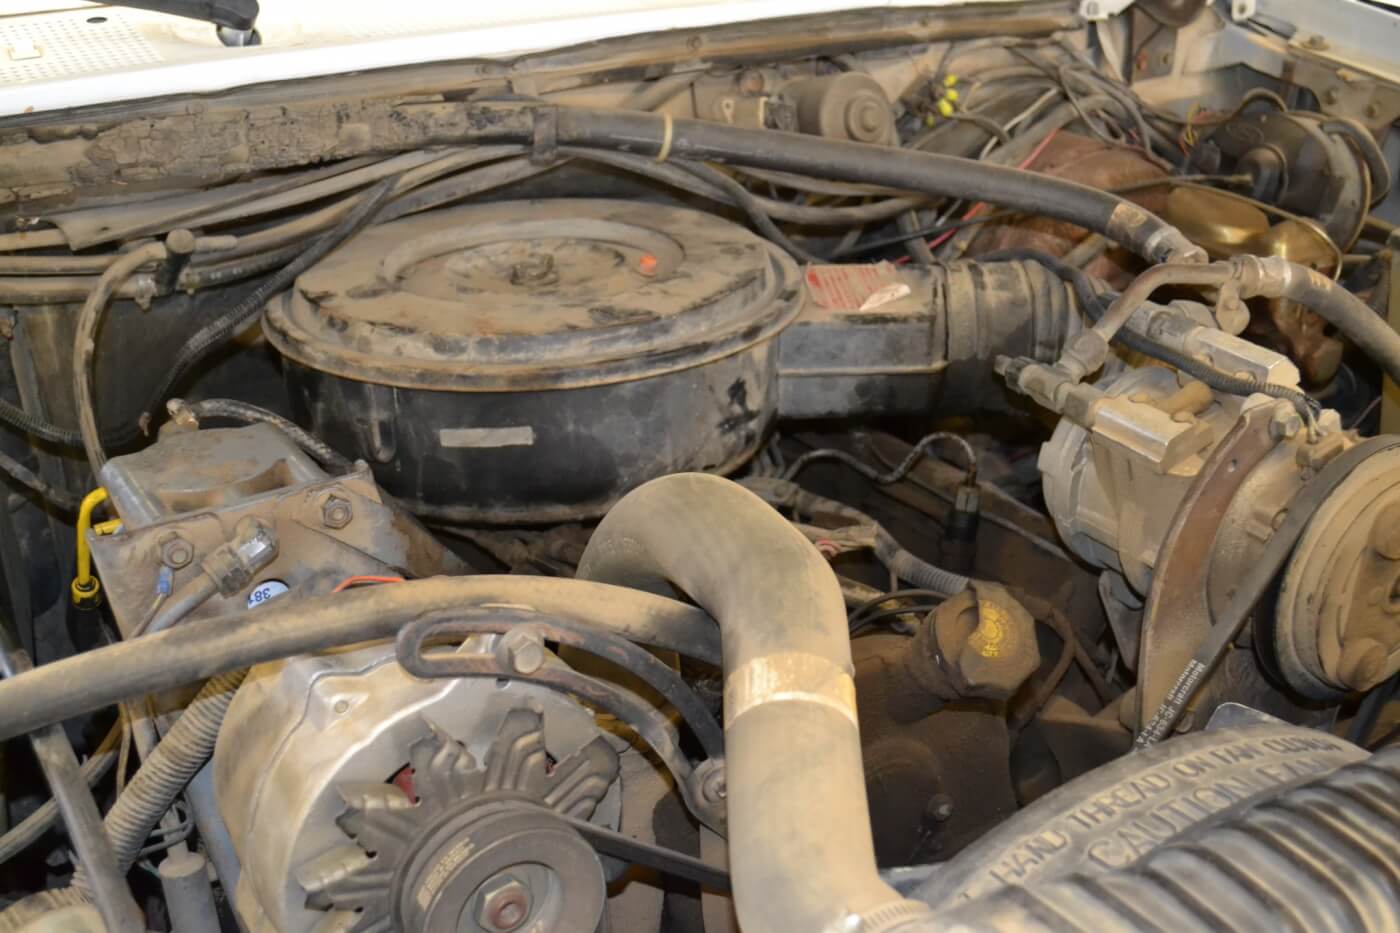 If your engine looks like this, you probably won't be driving very fast. While non-turbocharged diesels are still around, their horsepower is severely limited.